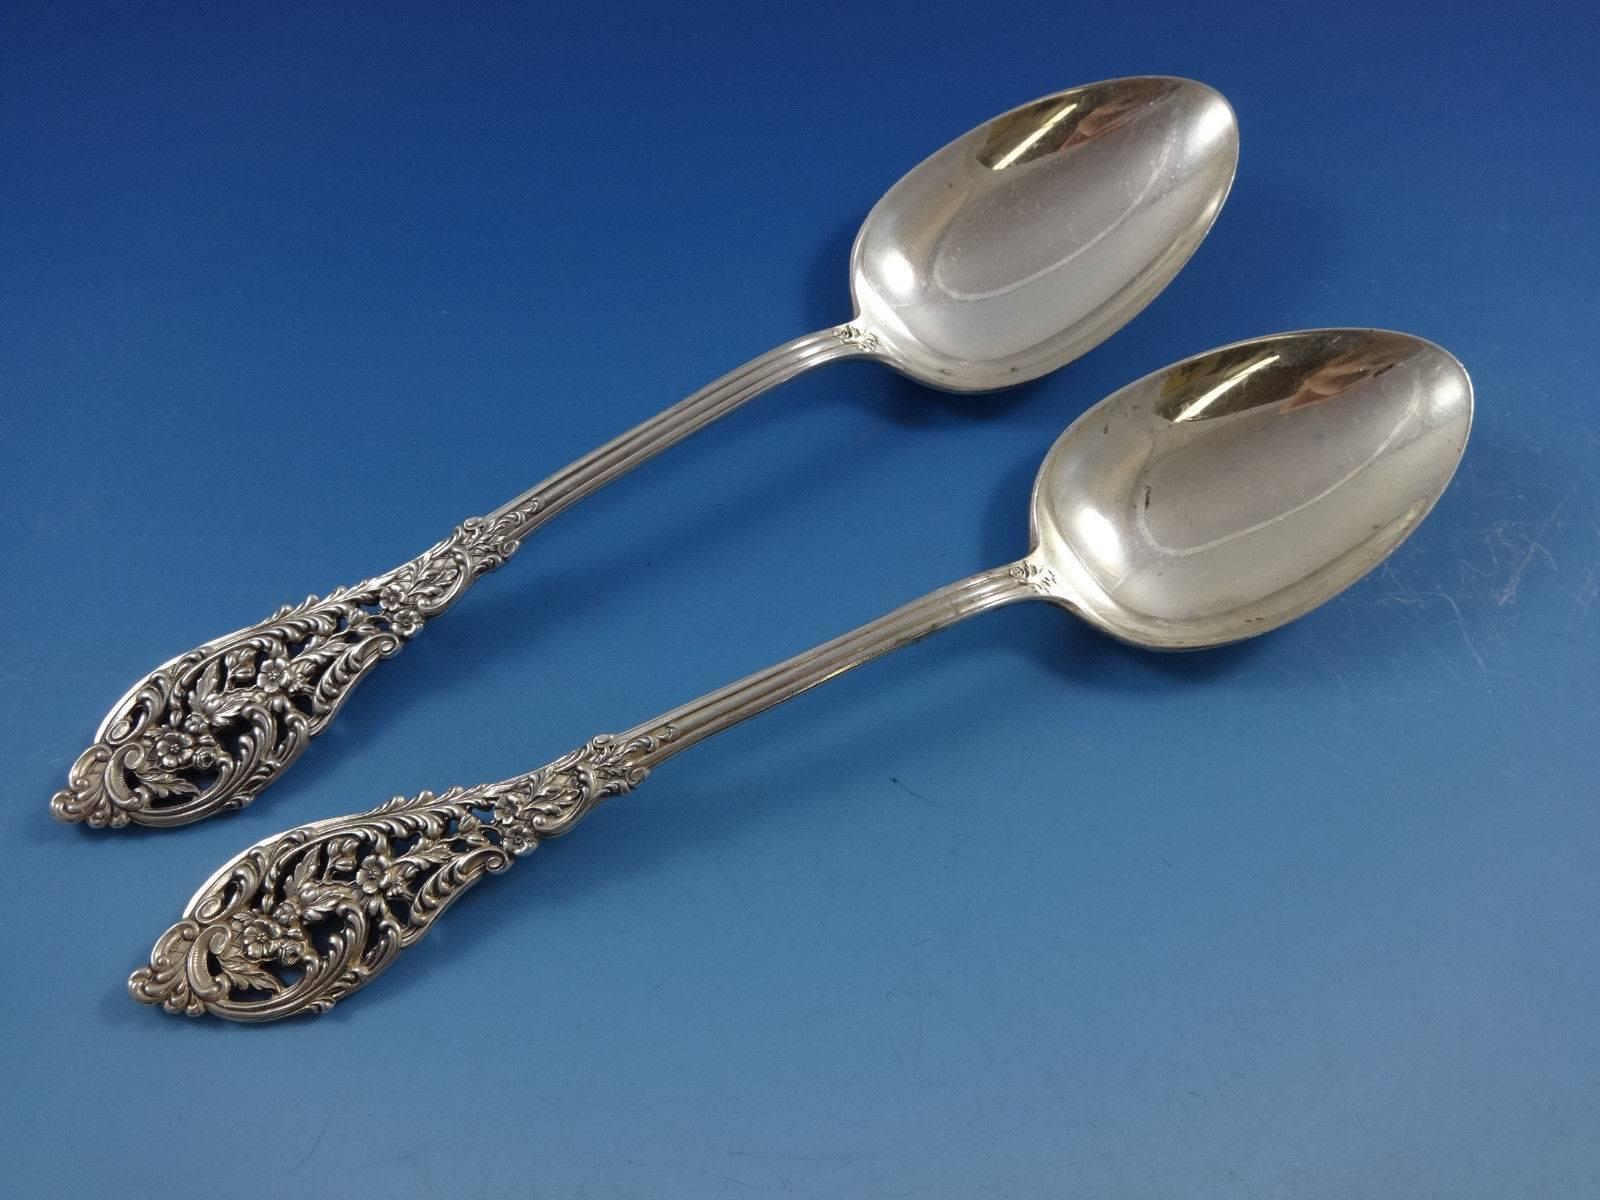 REED & BARTON FLORENTINE LACE STERLING SILVER SERVING SPOON 8 5/8" NO MONO 